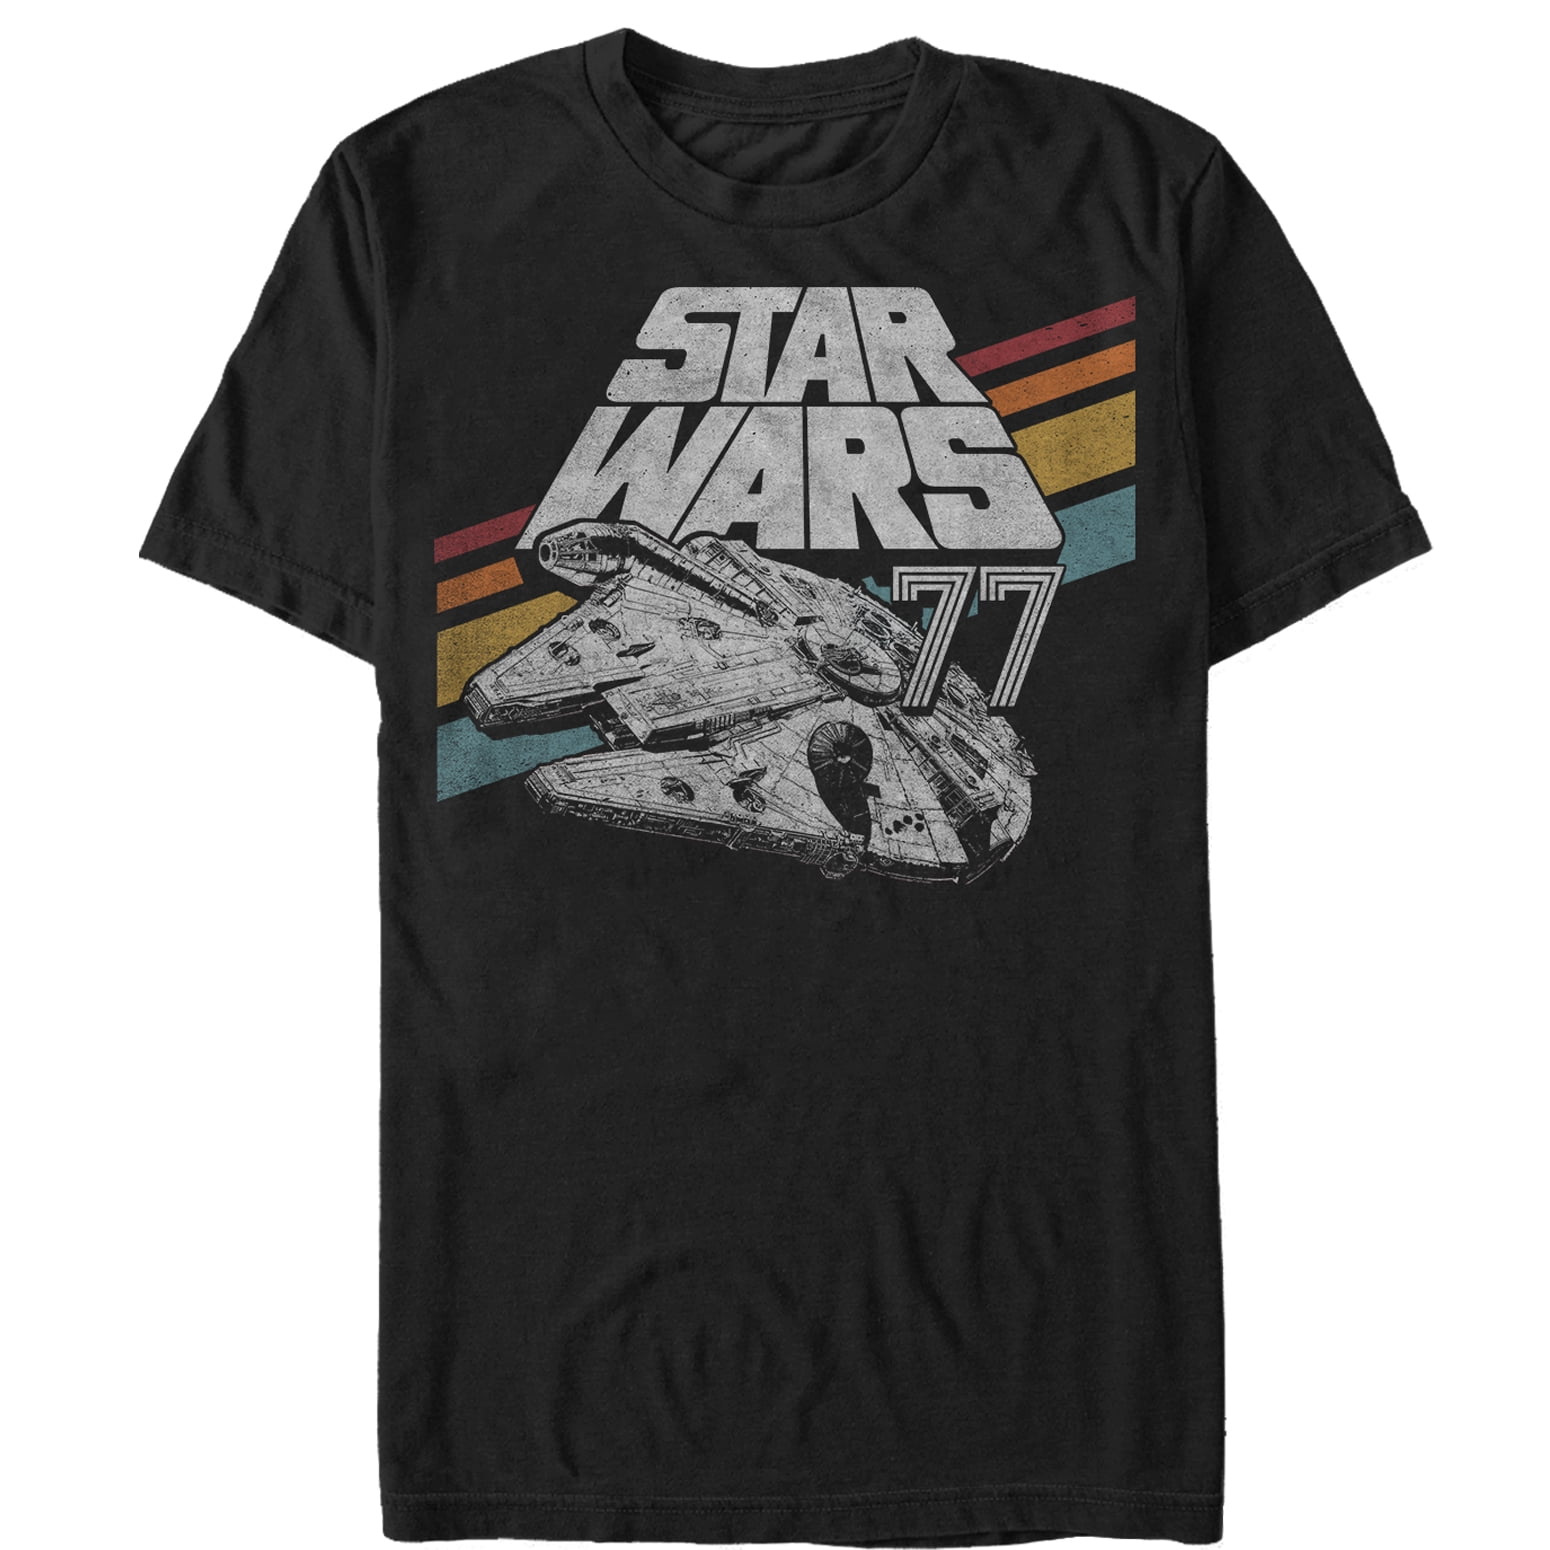 Vintage 90s STAR WARS Millennium Falcon Tie Fighter Death Star Tshirt Size Kids XLarge Clothing Unisex Kids Clothing Tops & Tees 